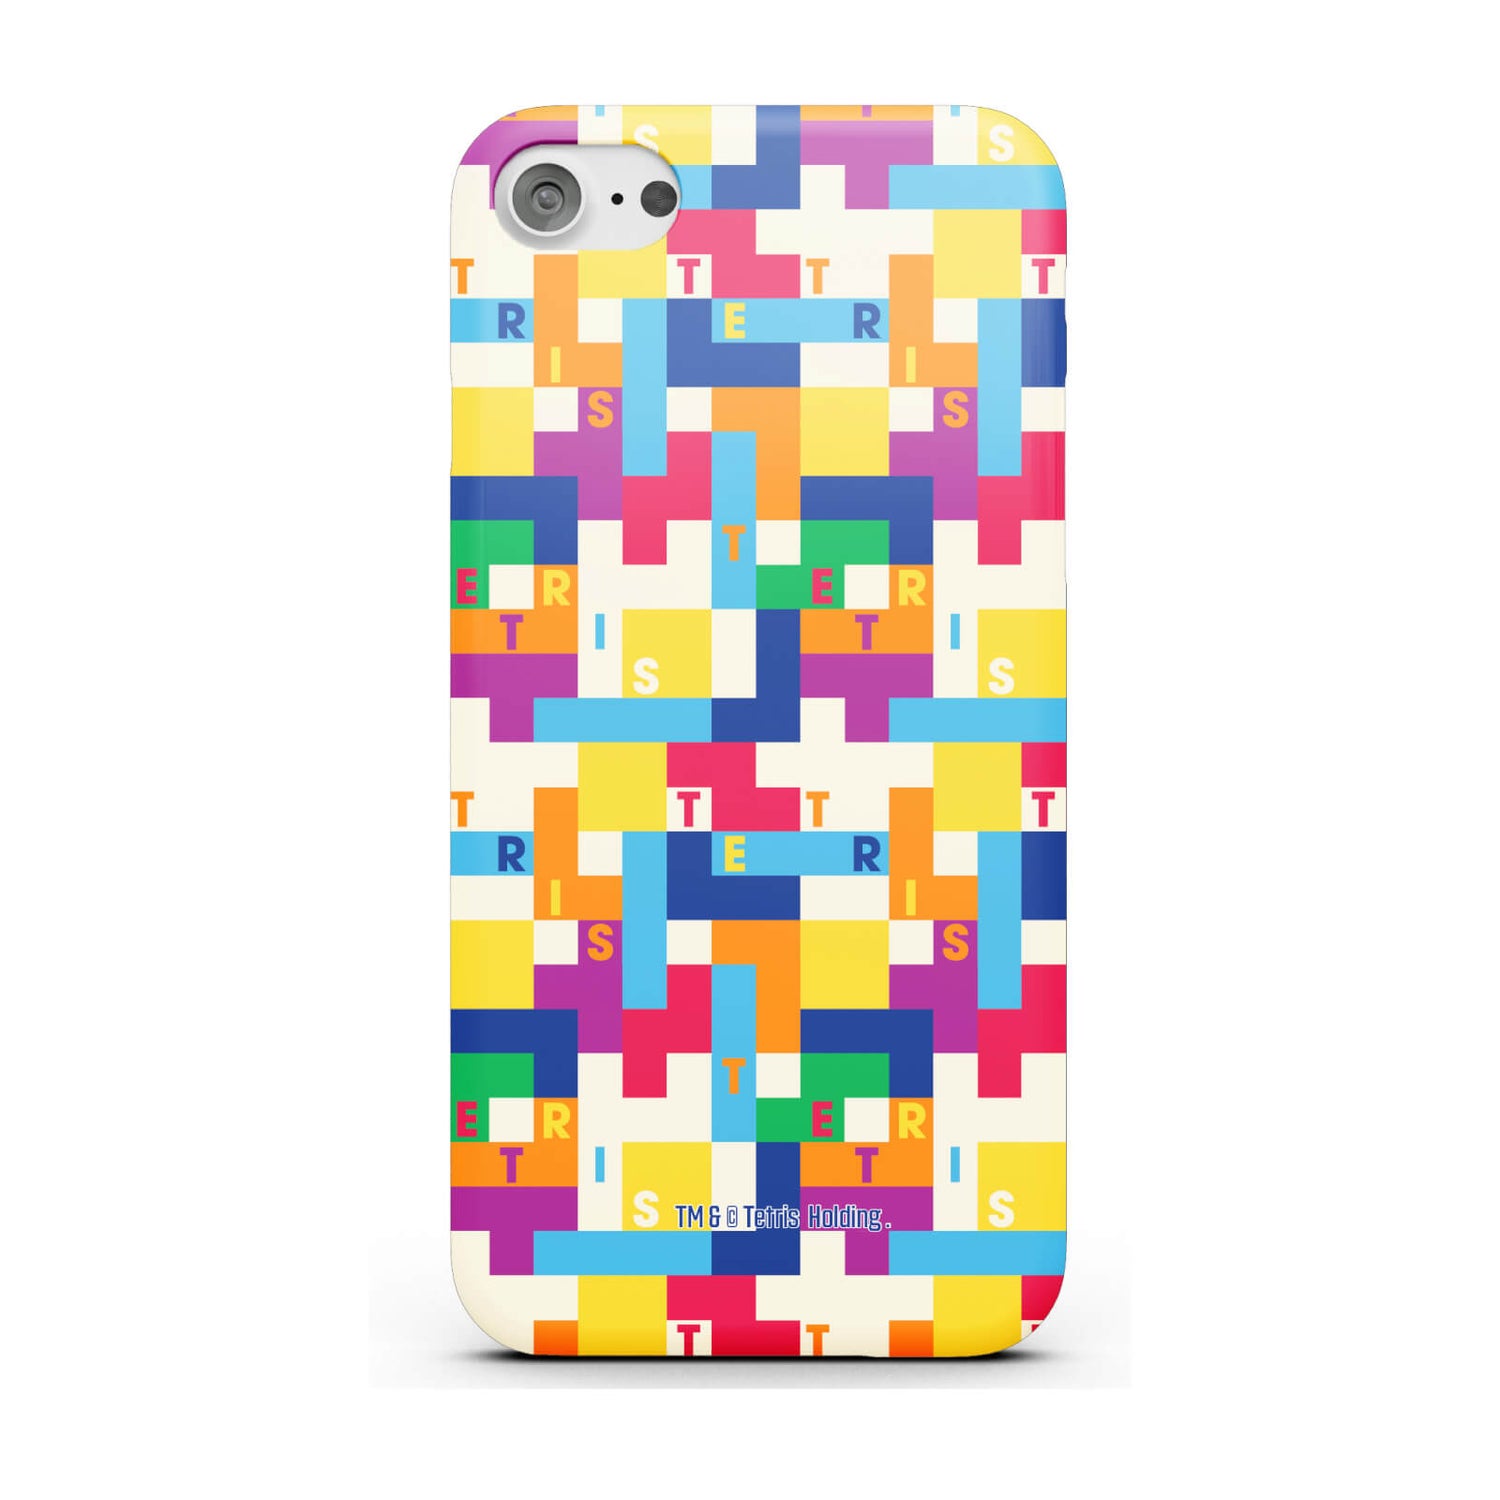 Tetris&trade; Multi Block Phone Case for iPhone and Android